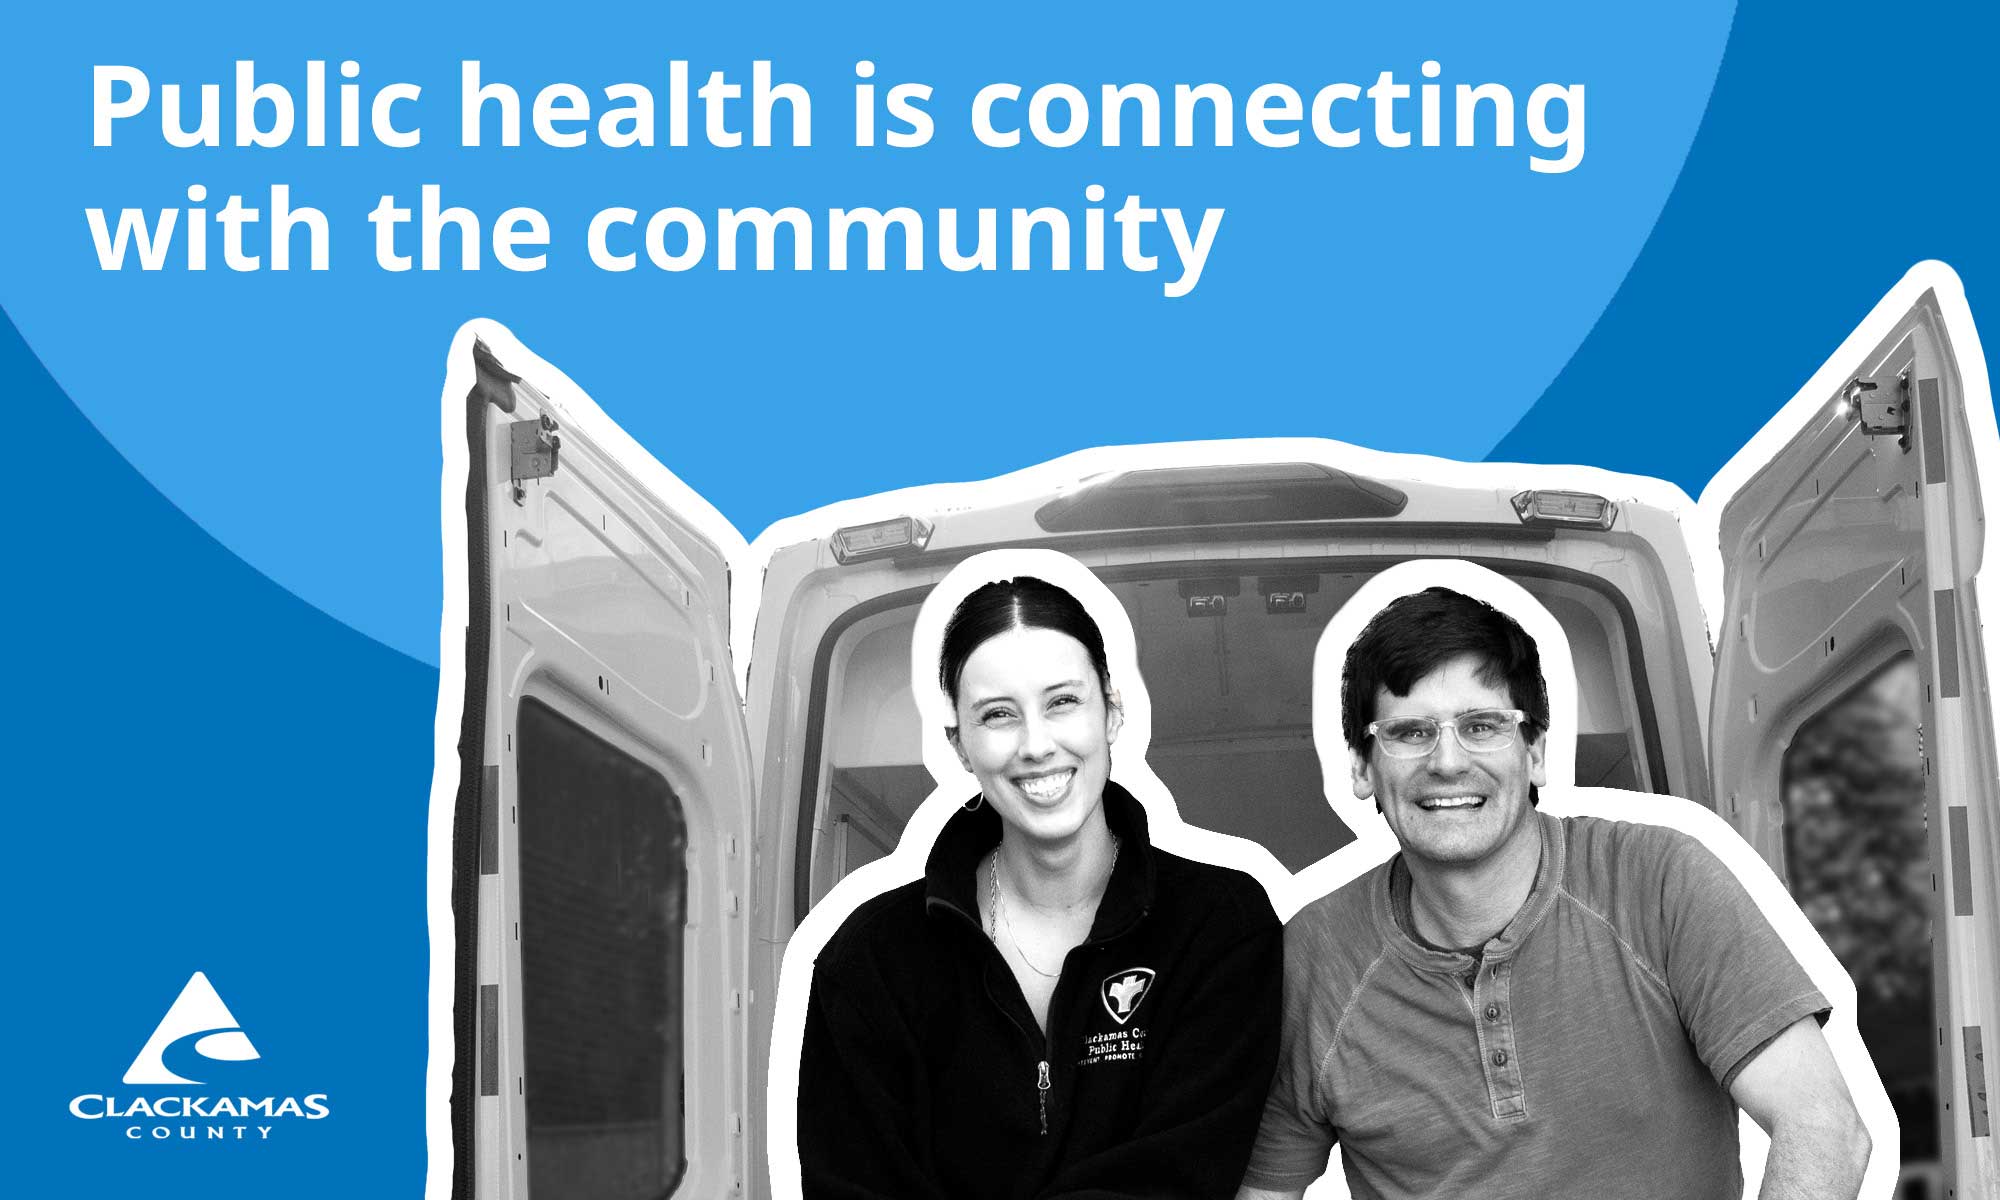 Public health is connecting with the community